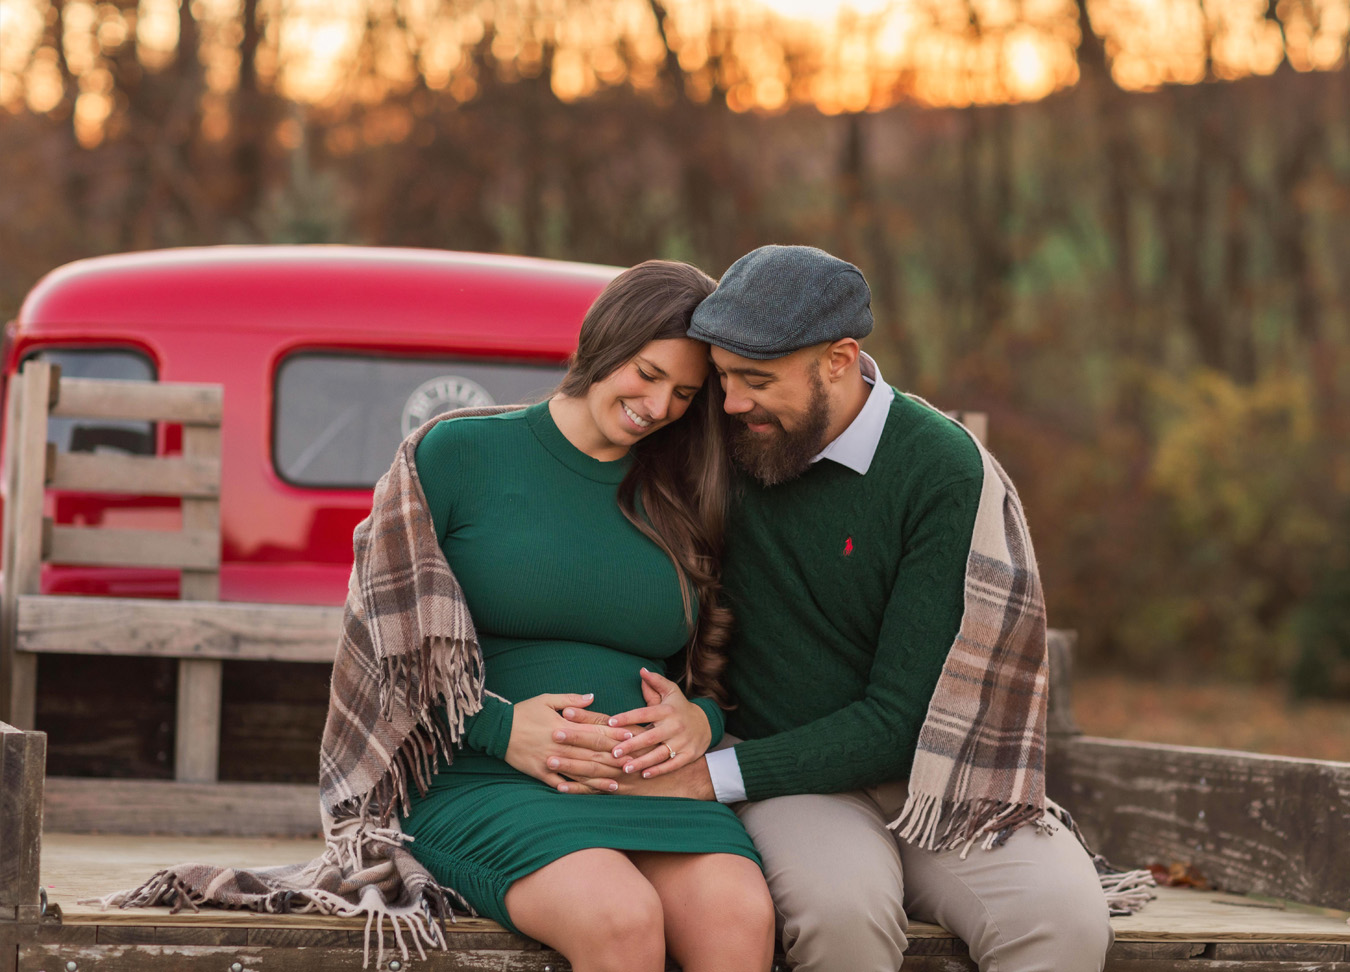 Christmas Maternity Photoshoot in Northern Virginia featuring a pregnant woman and her husband sitting on the bed of a truck.